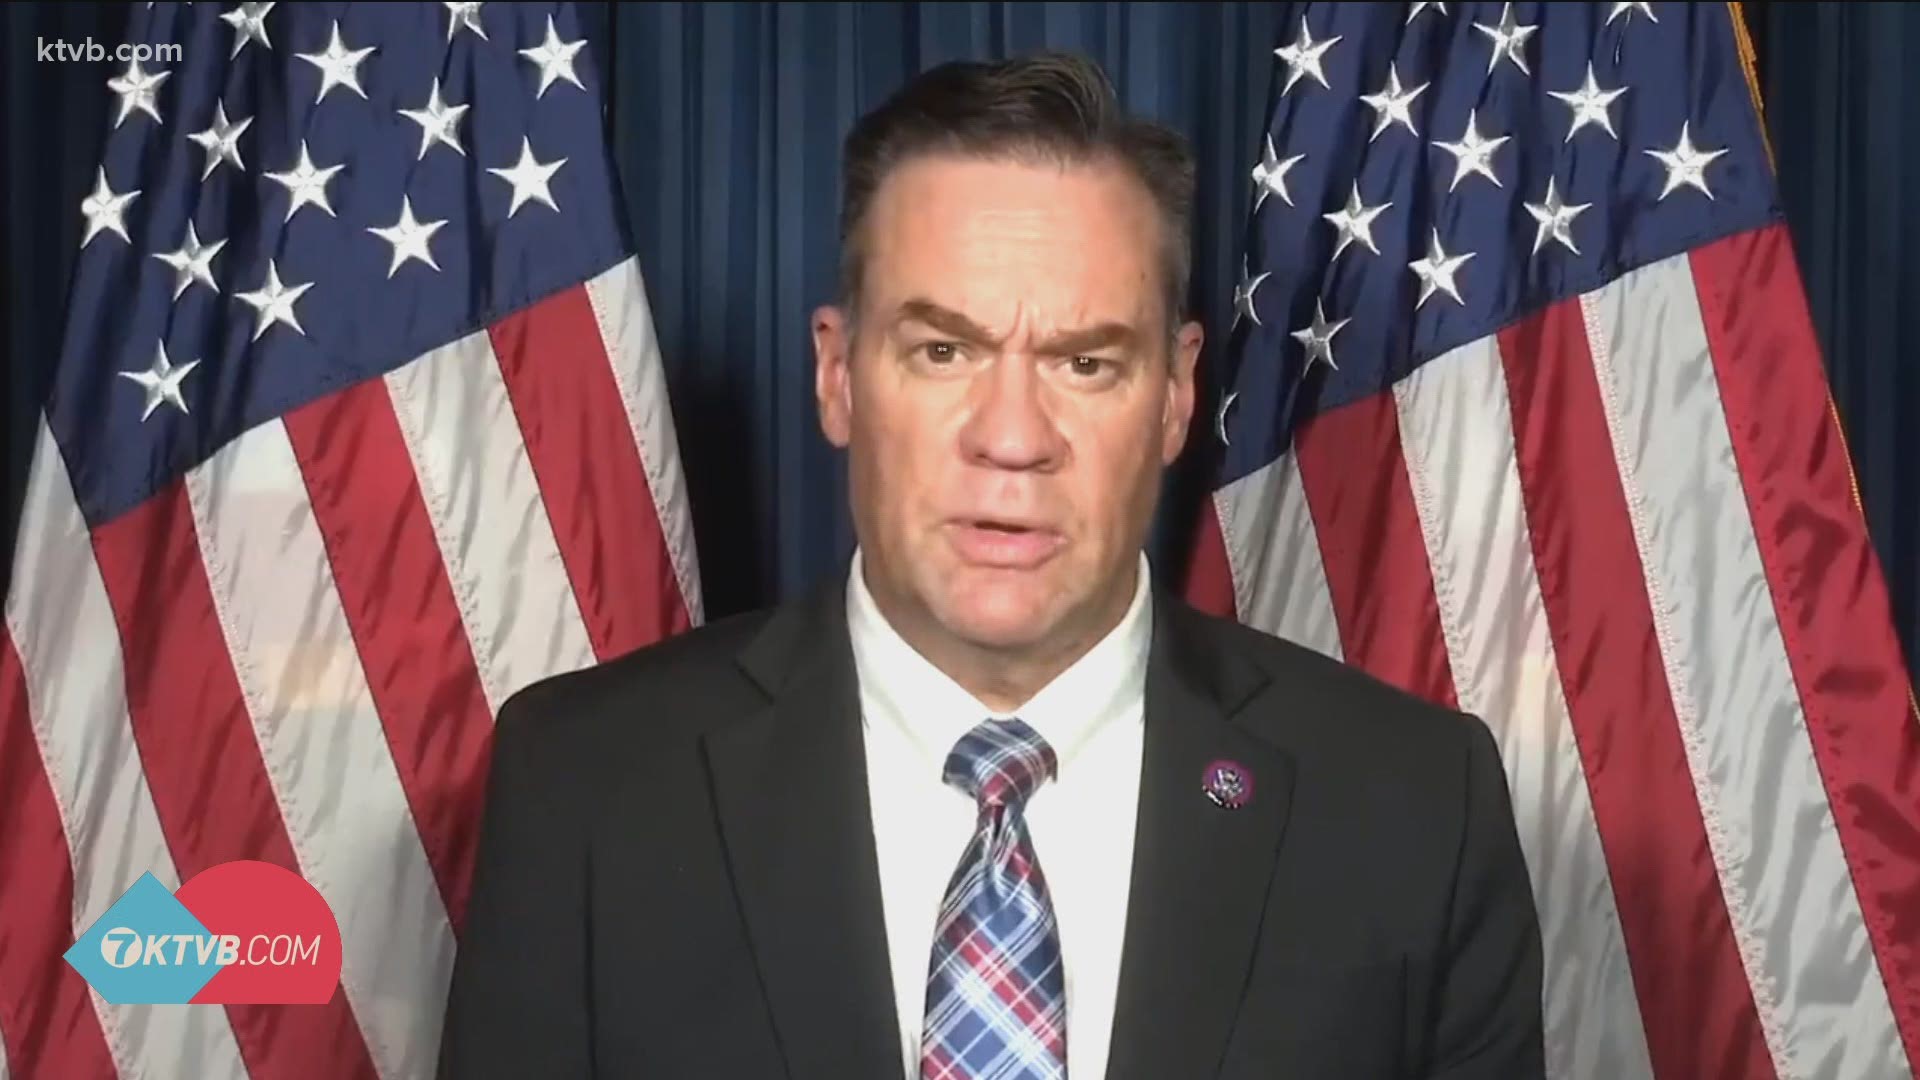 Idaho Rep. Russ Fulcher released a video addressing what he calls valid concerns regarding the results of the November 3rd election.